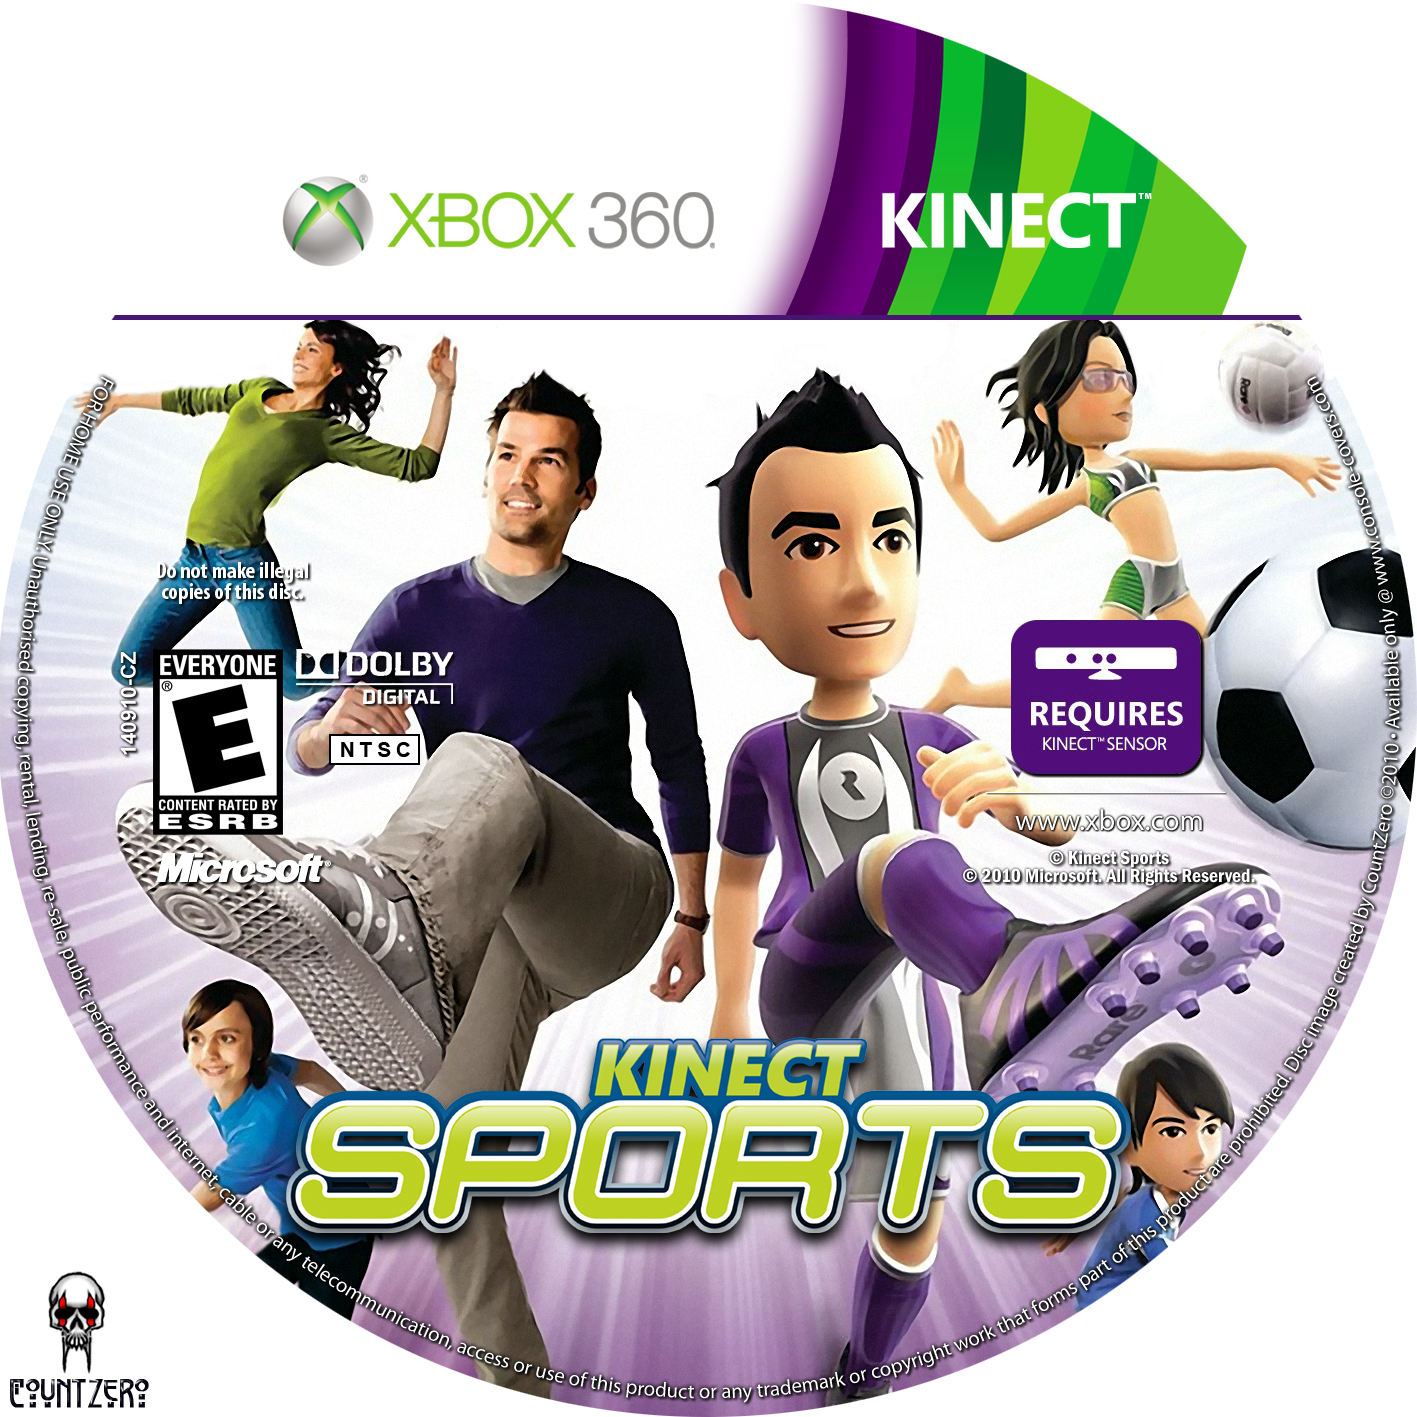 Xbox kinect sport. Xbox 360 Kinect Sports Ultimate. Kinect Sports Xbox 360 Disk. Kinect Sports Xbox 360 DVD. Kinect Sport Ultimate collection Xbox 360.